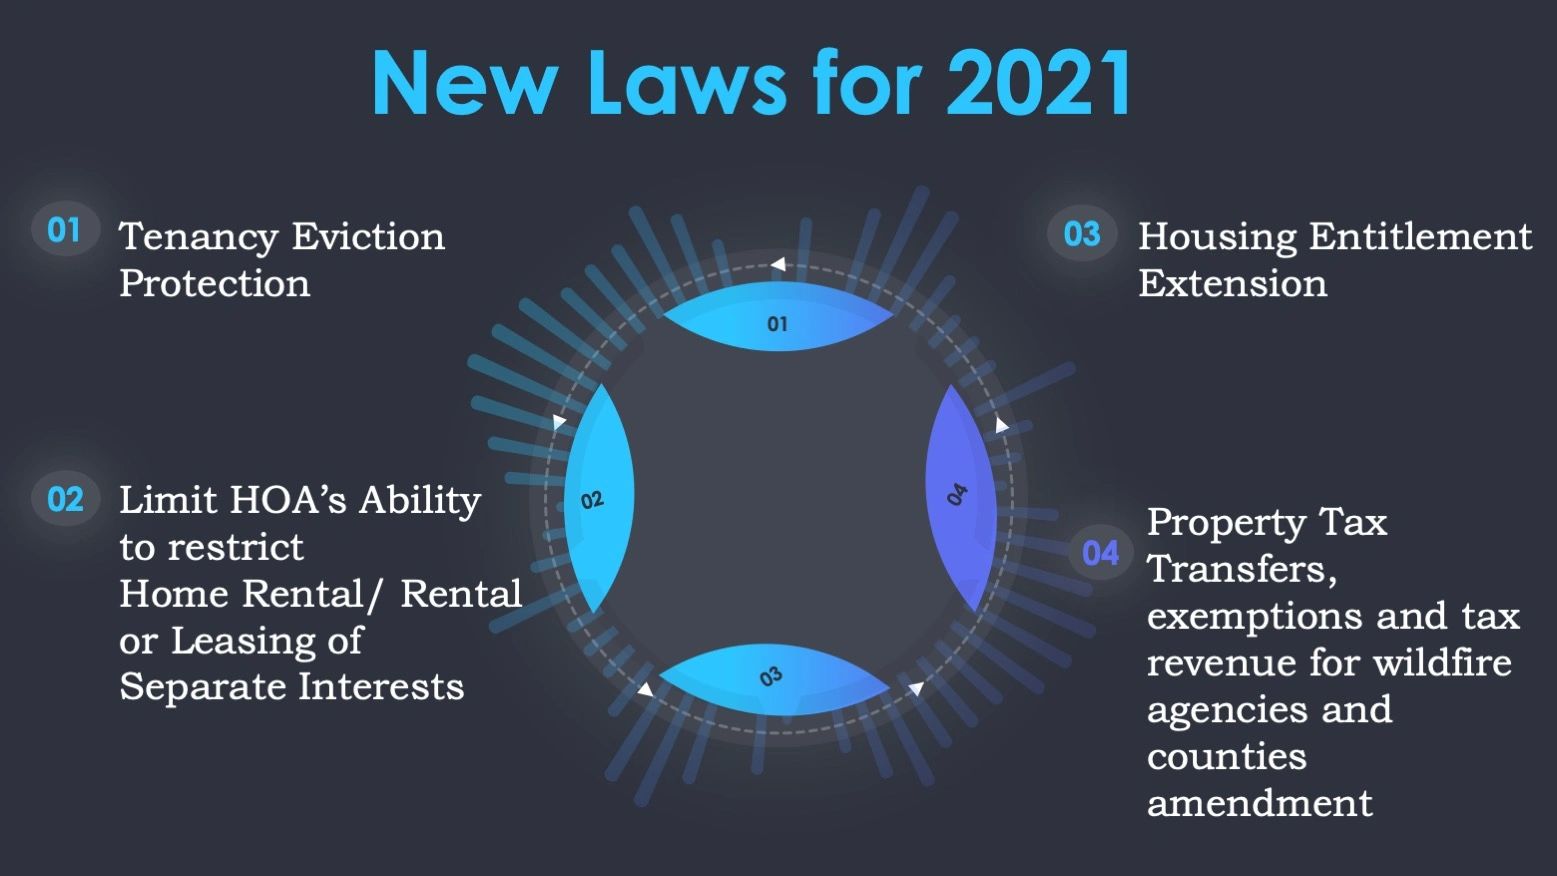 New Real Estate Laws for 2021